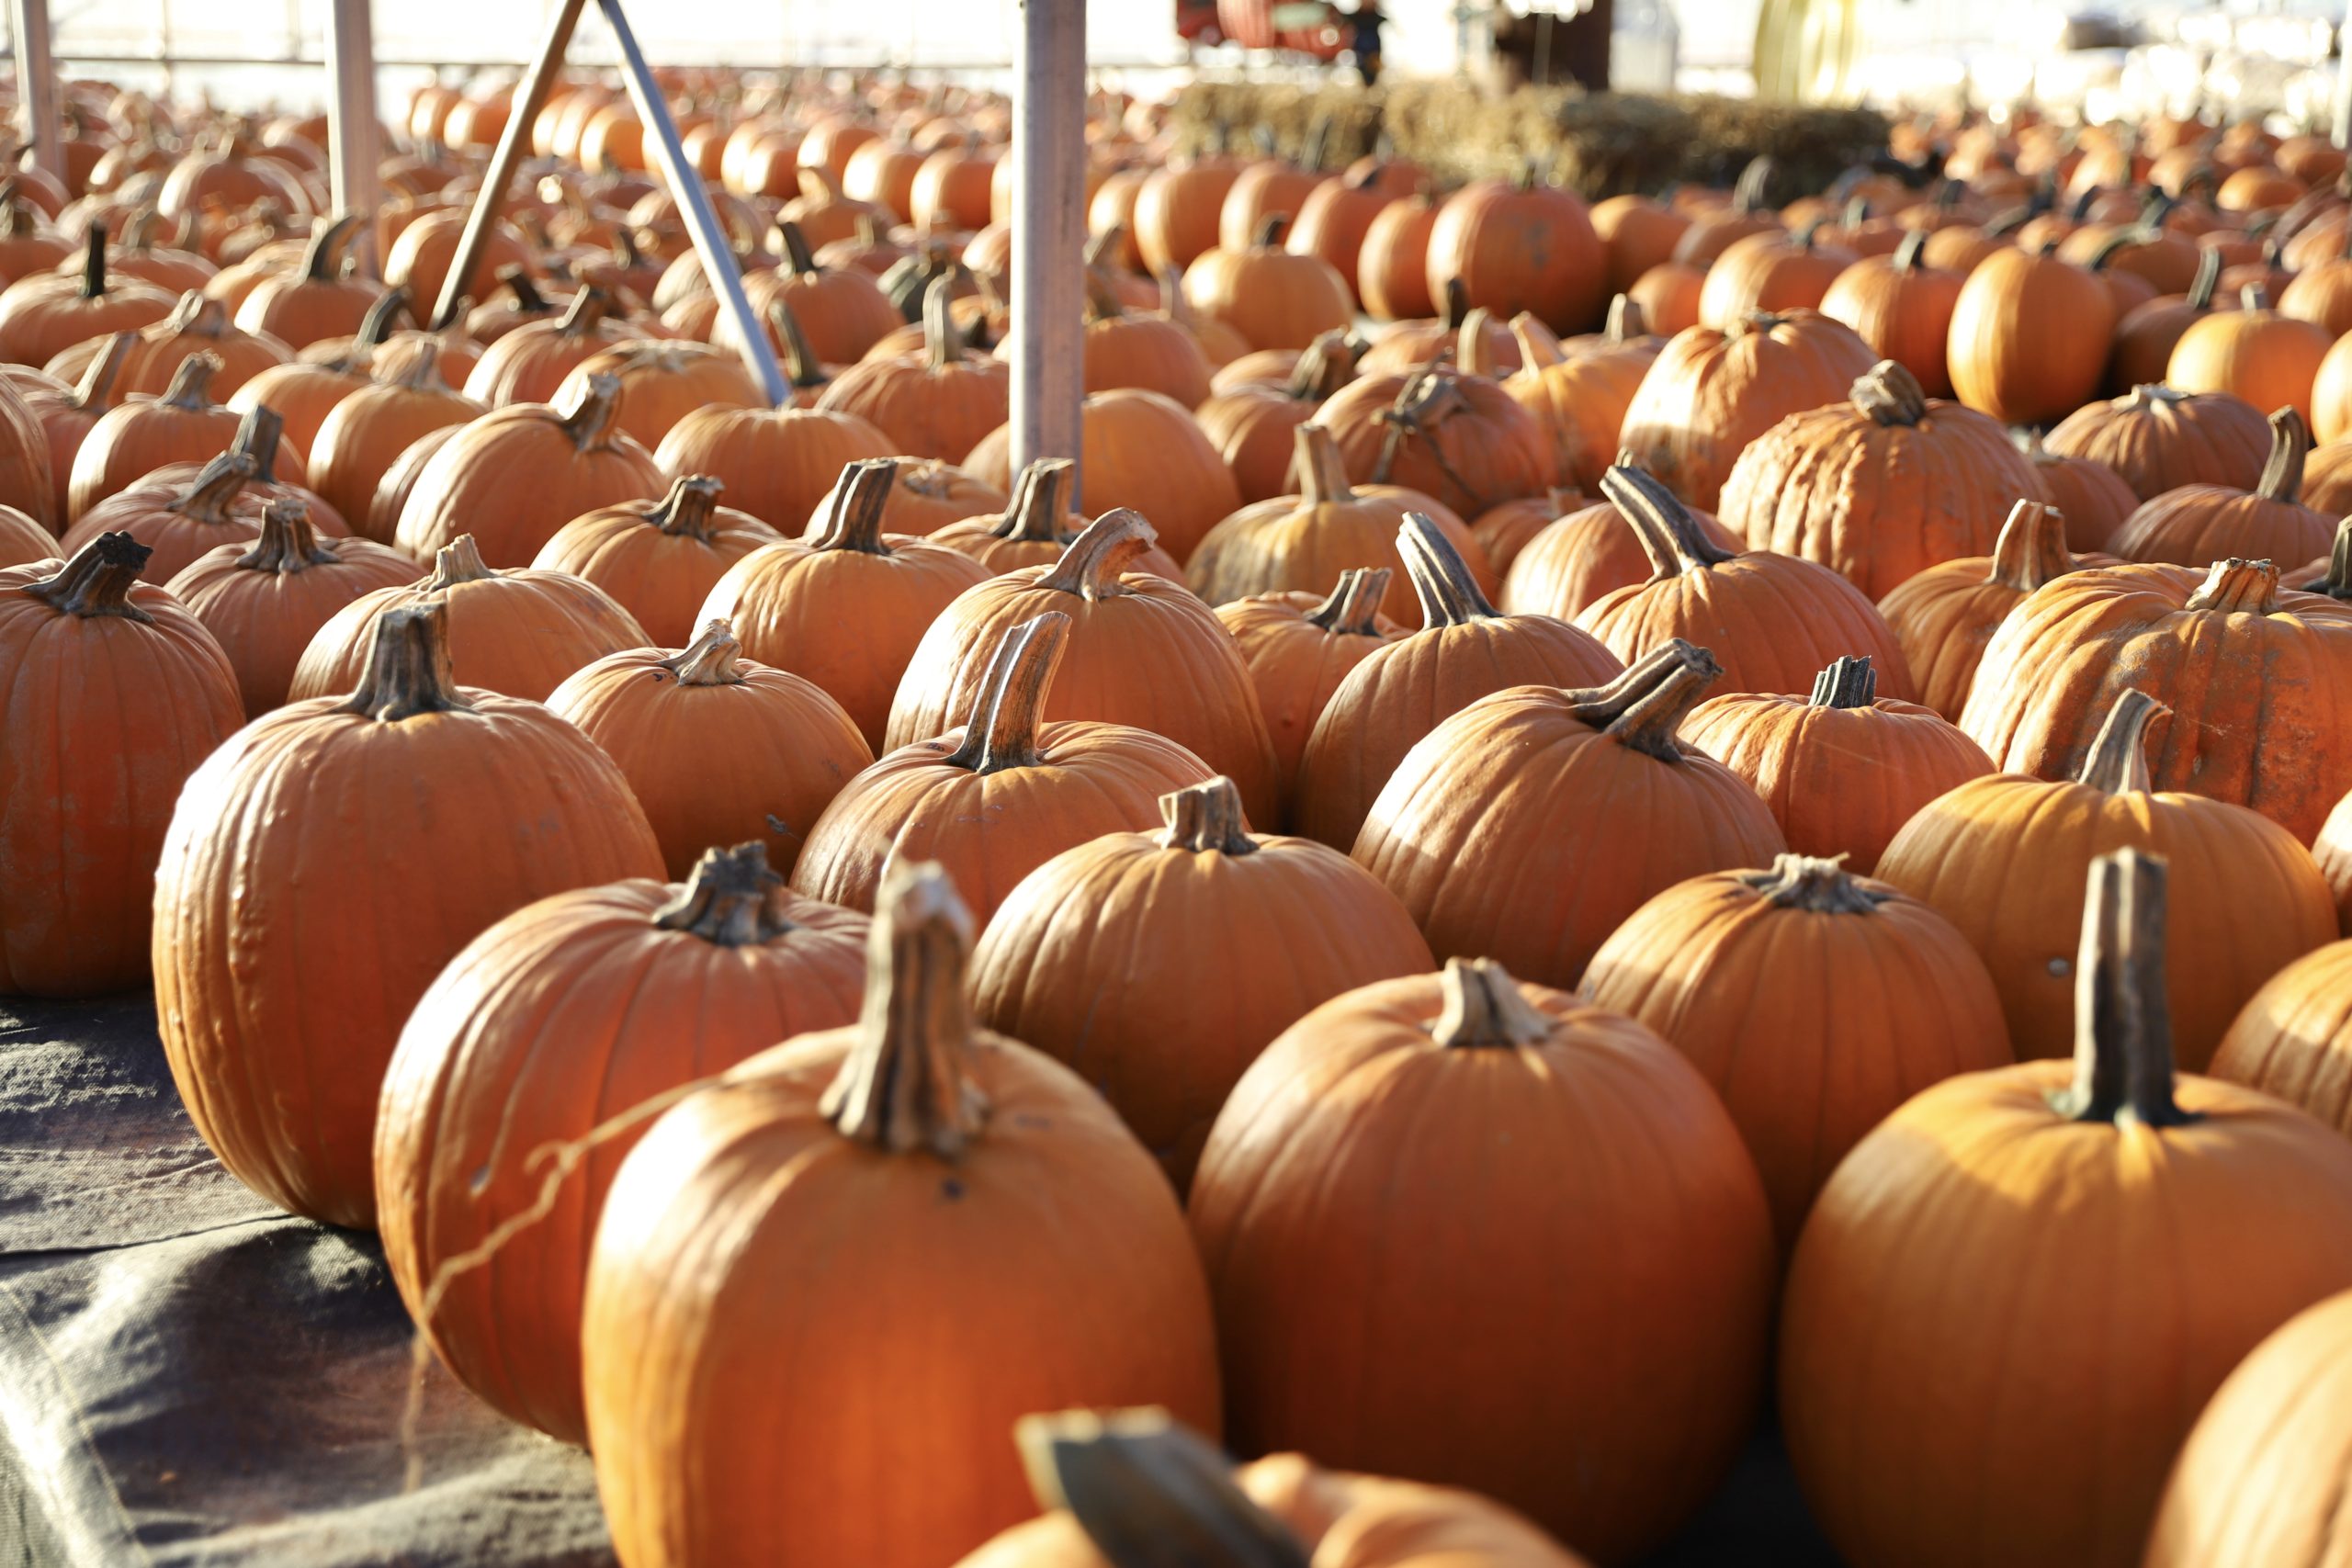 You are currently viewing Pumpkins, Corn Pits & Fall Activities in Stillwater, Minnesota